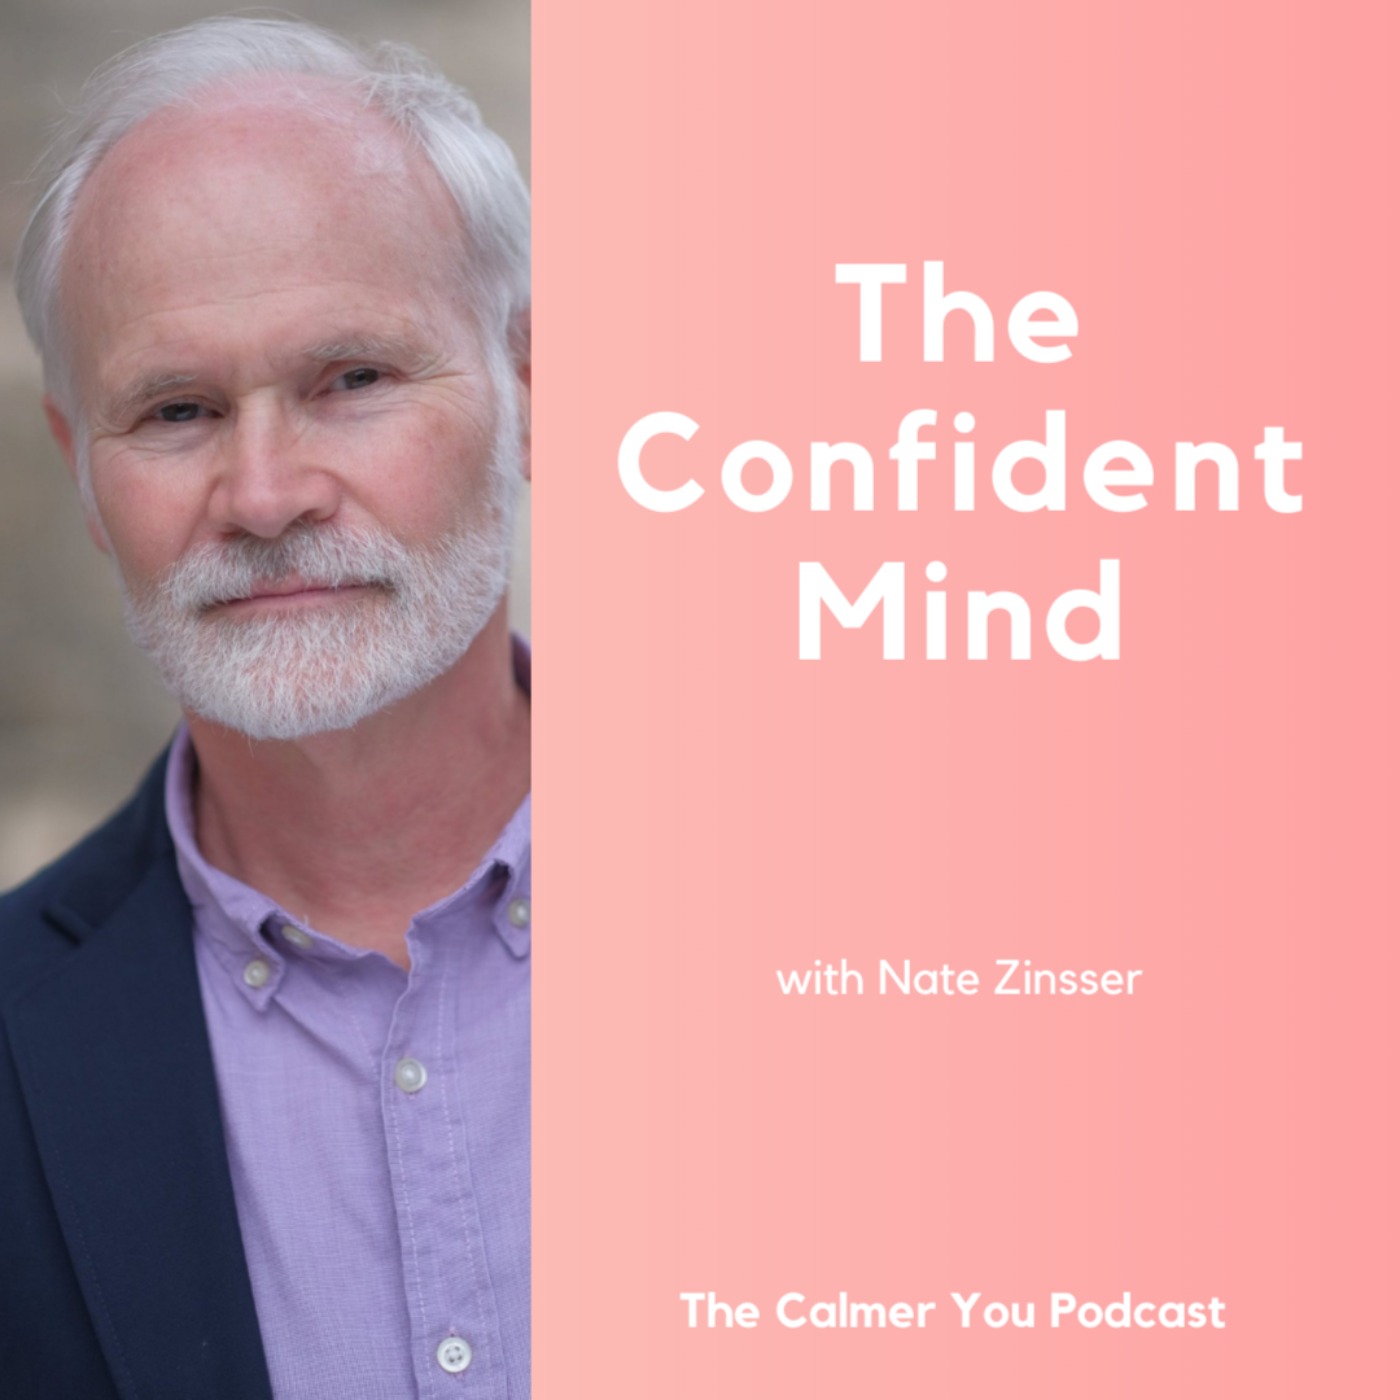 Ep 177. The Confident Mind with Nate Zinsser